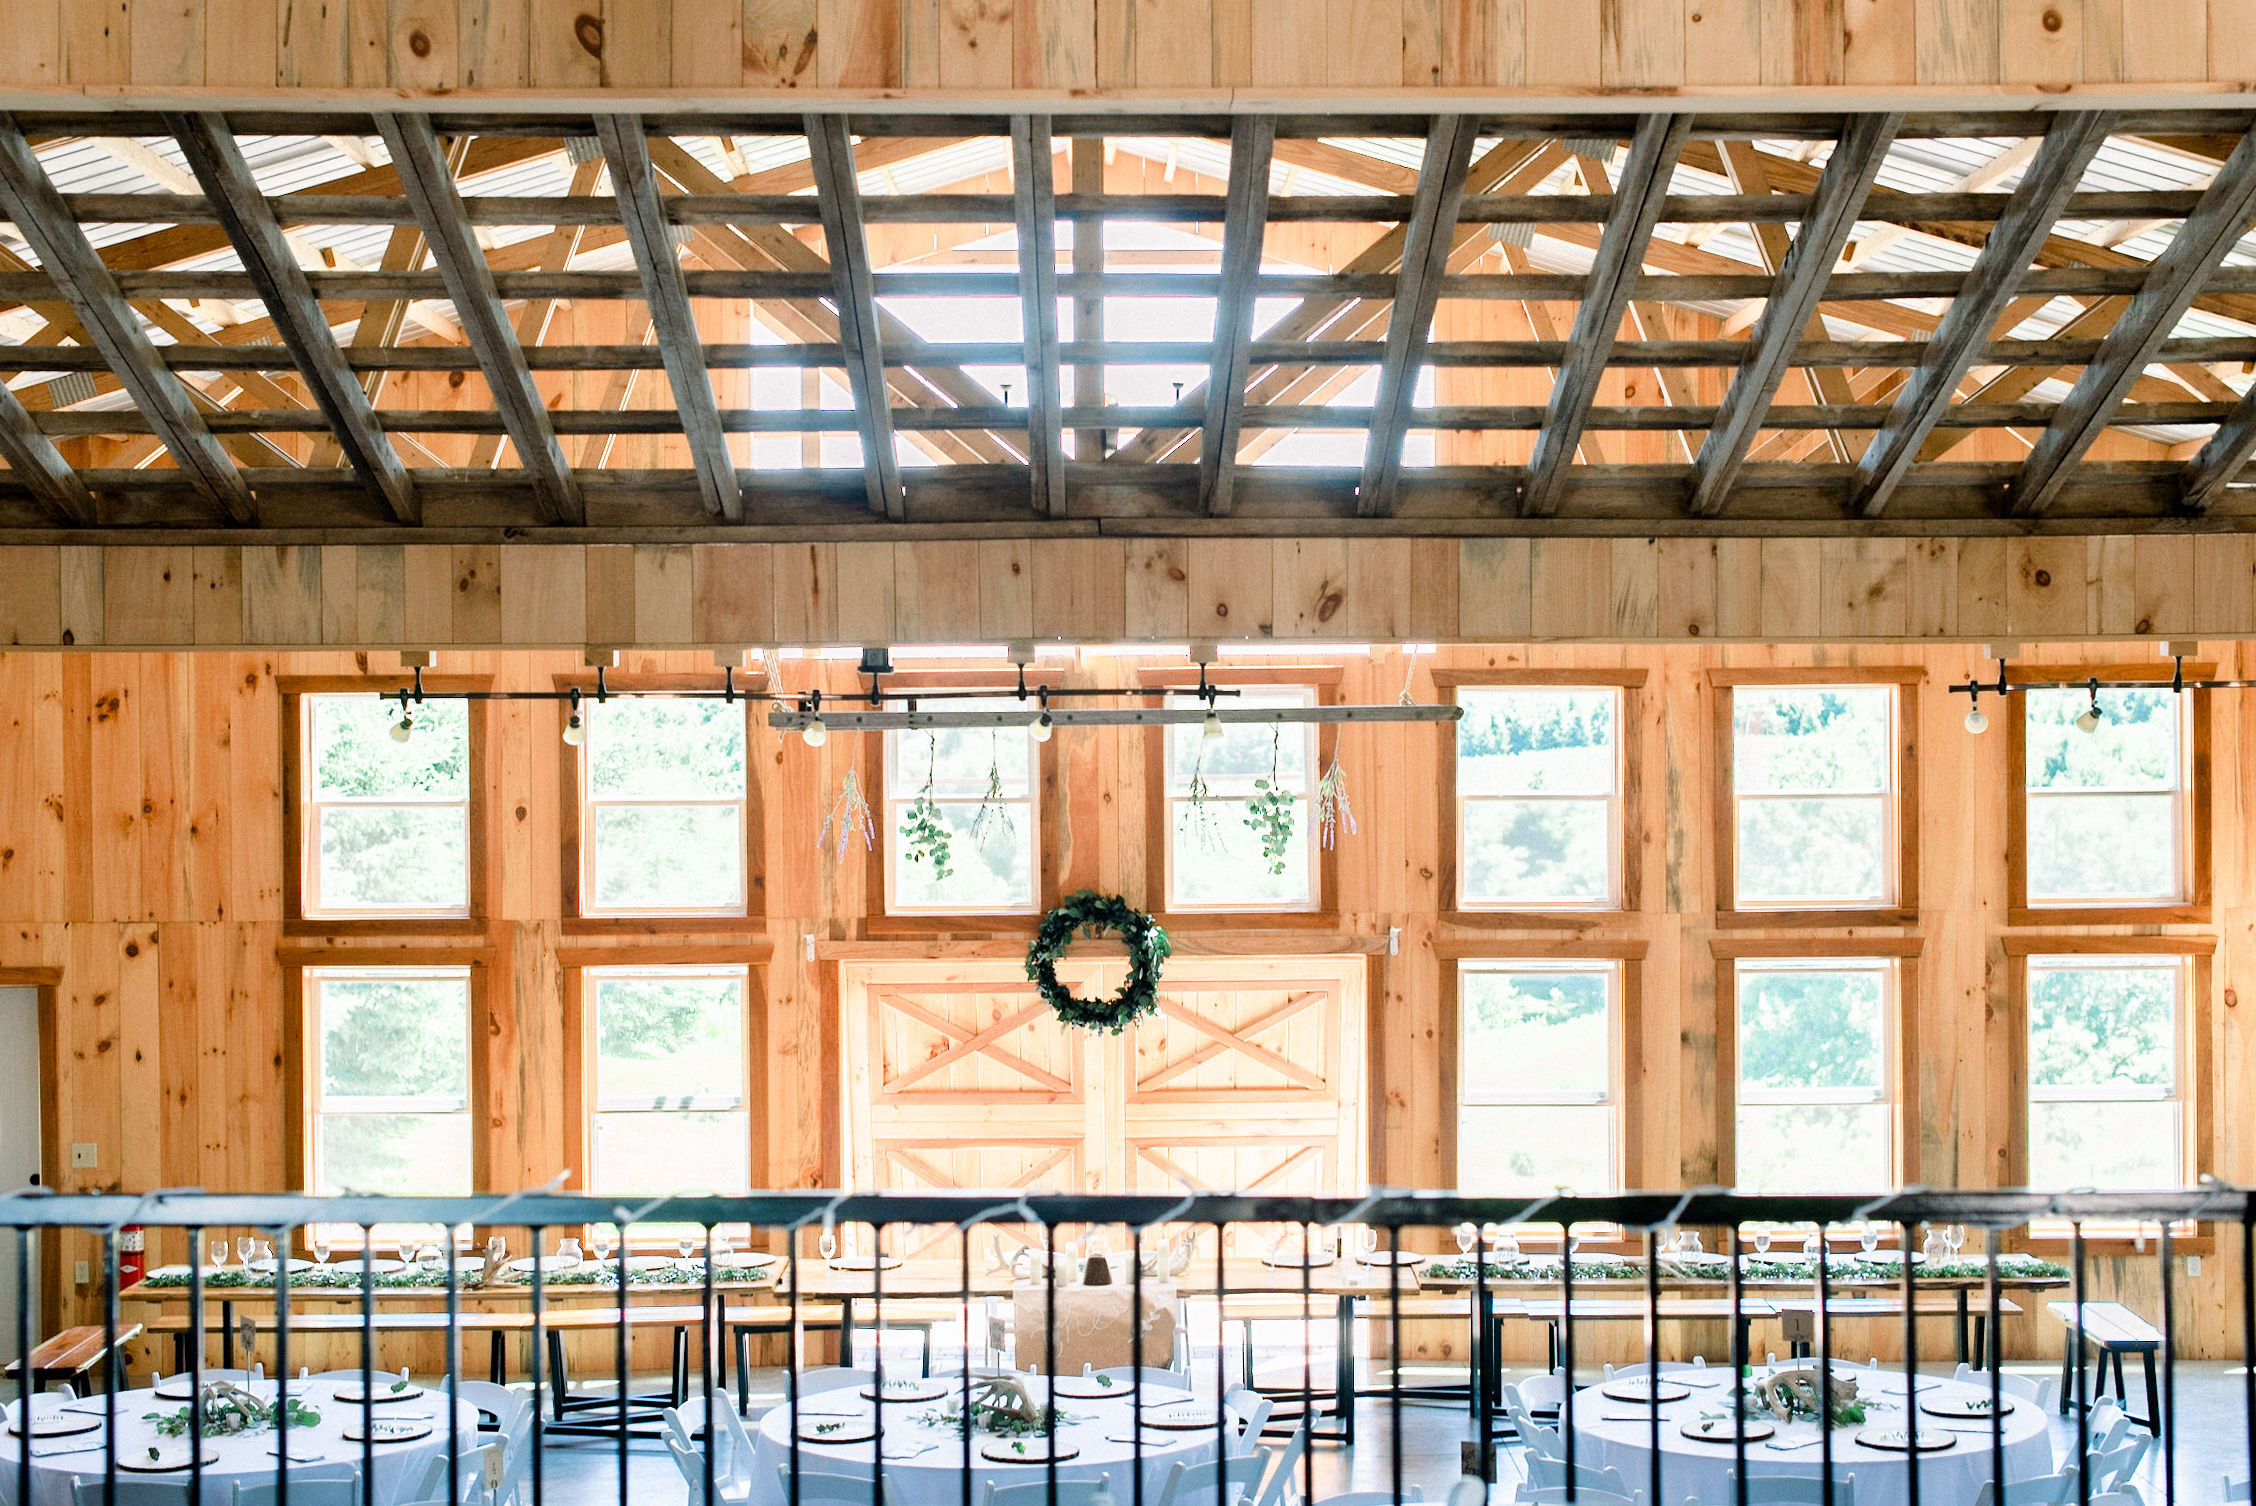 Interior of pavilion with lots of windows and light shining through exposed rafters